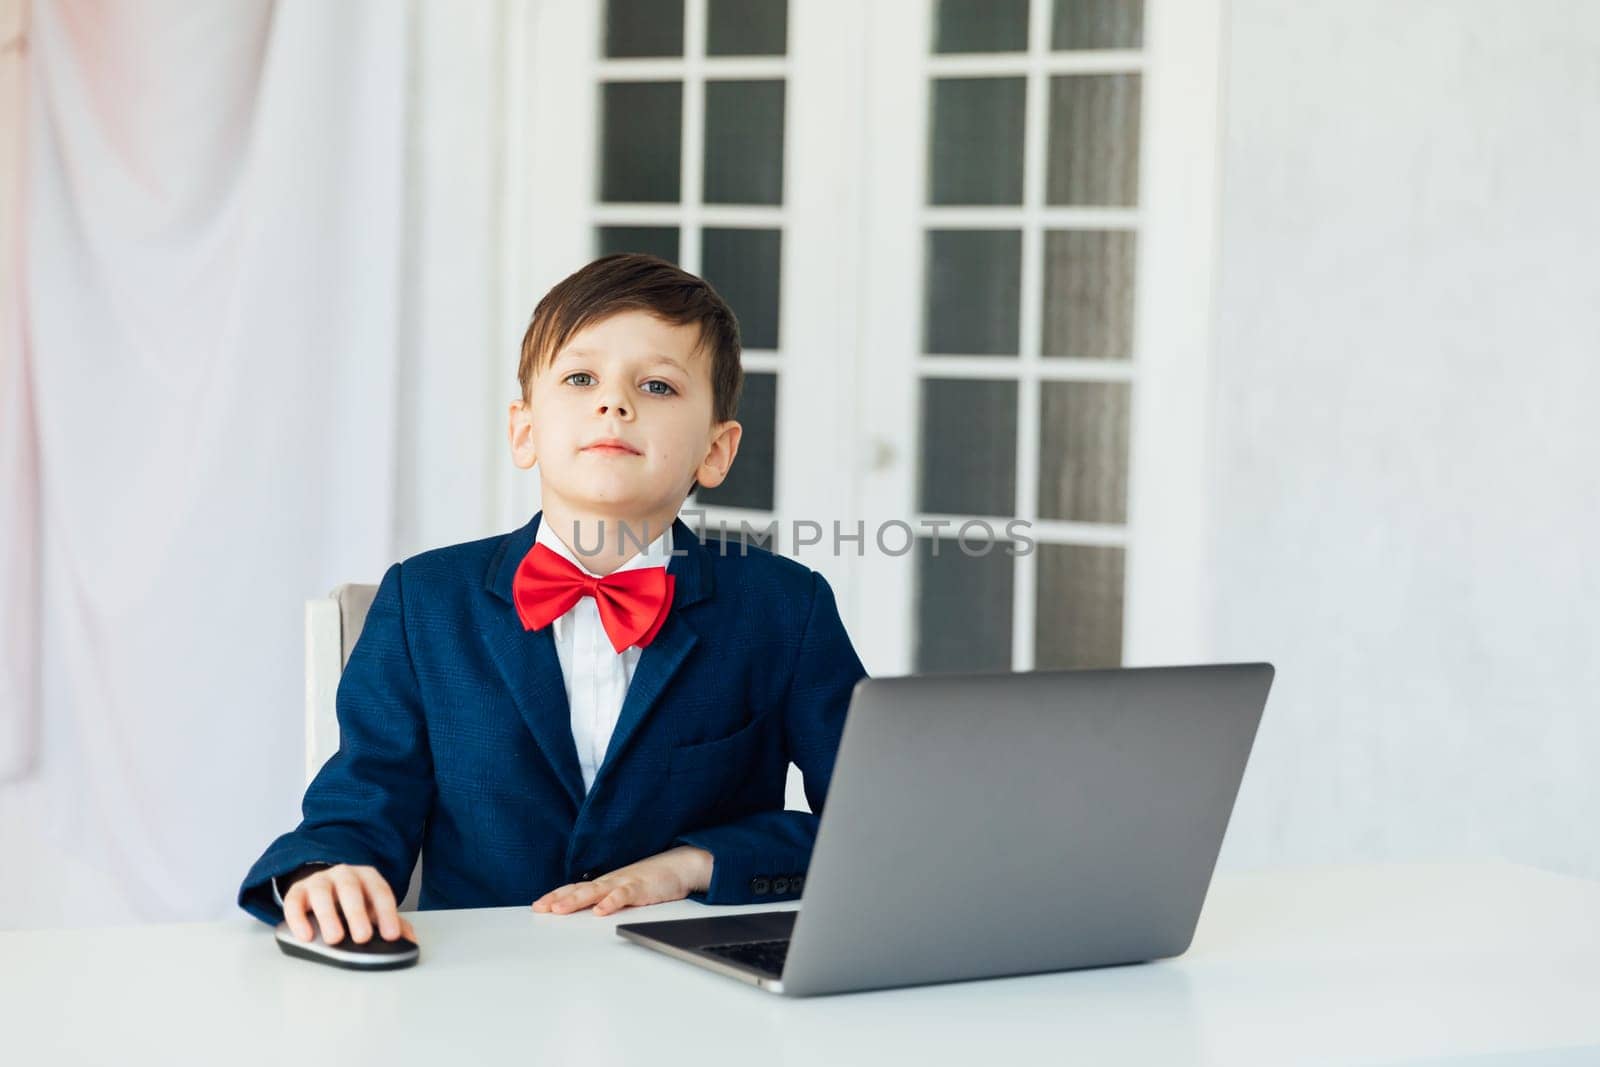 at school in room in the classroom education online boy sitting at a laptop at a table